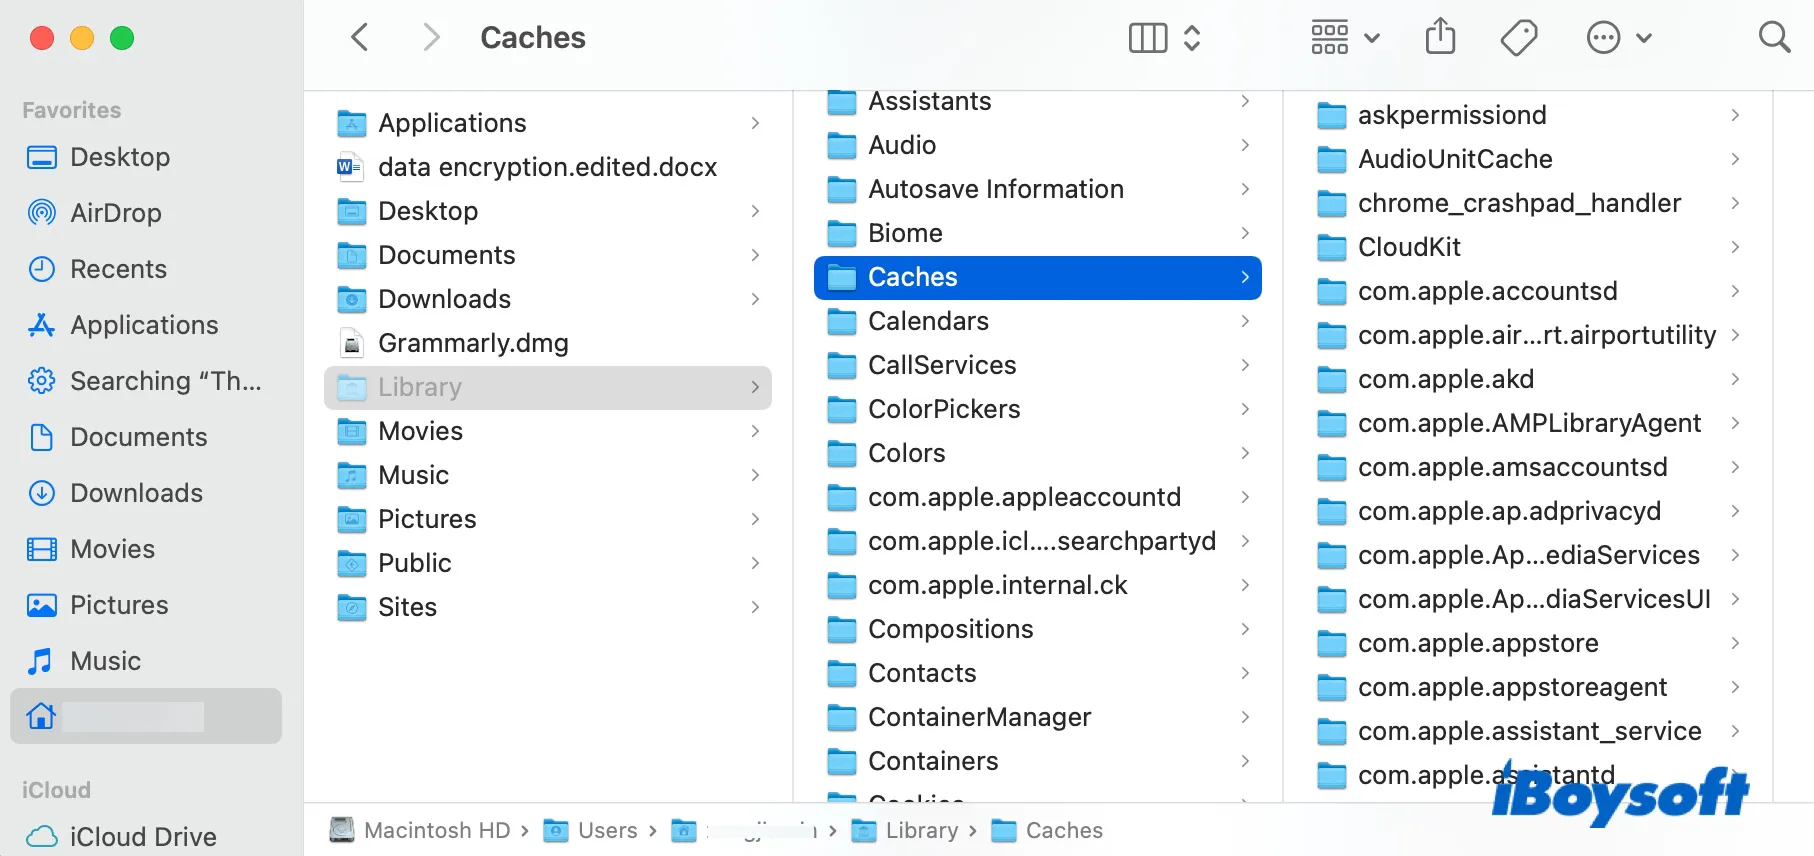 Caches folder is part of the equivelant of AppData folder on Mac